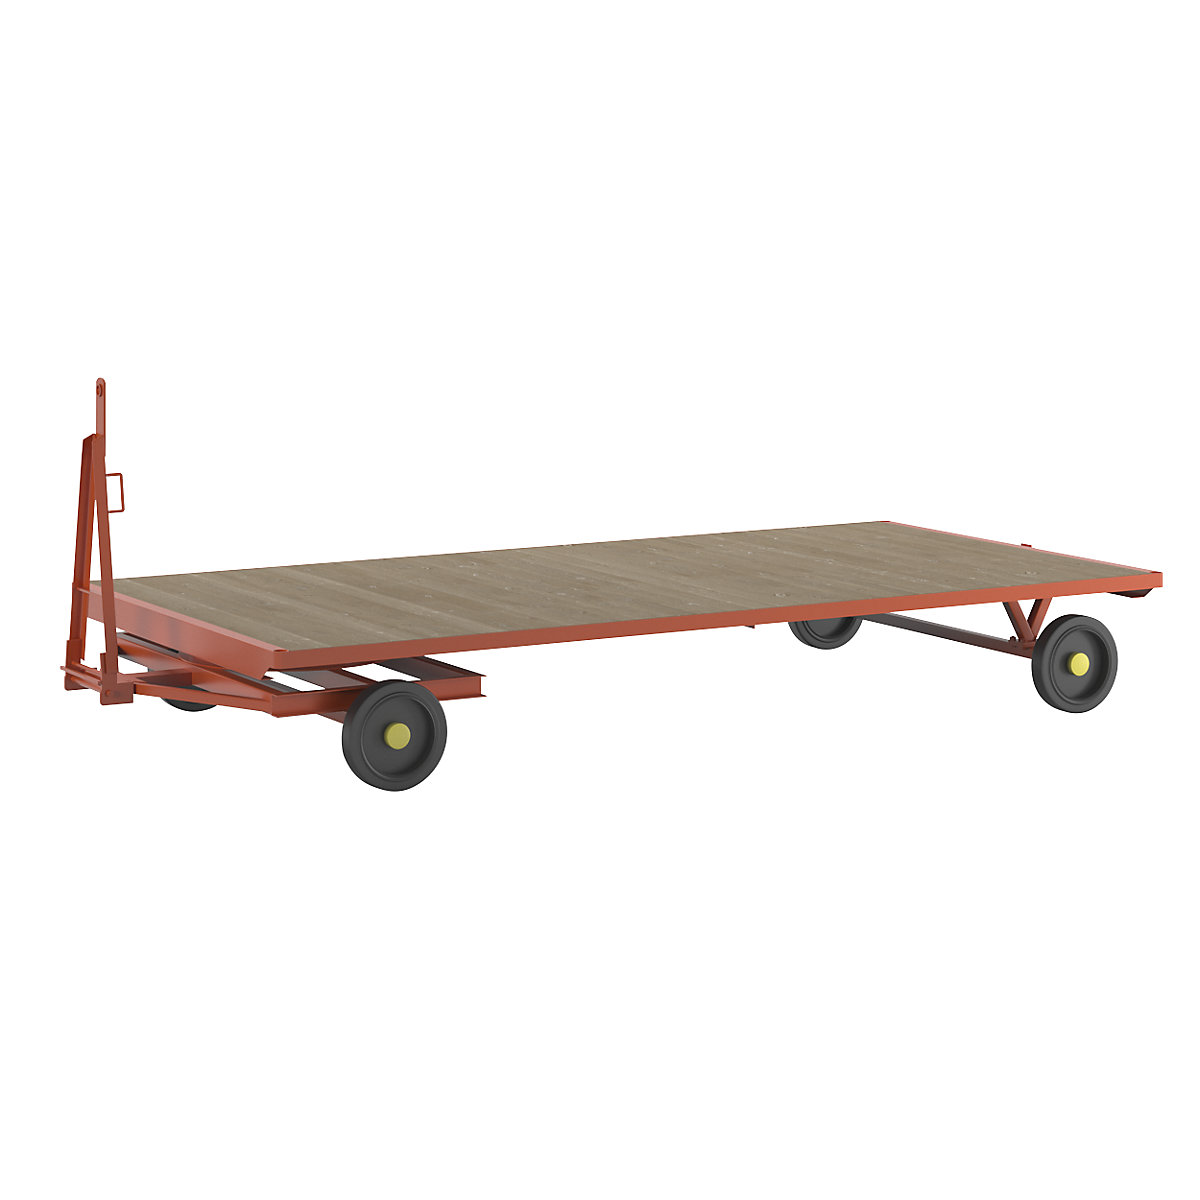 Trailer, 2-wheel turntable steering, max. load 2 t, platform 4.0 x 2.0 m, solid rubber tyres-12